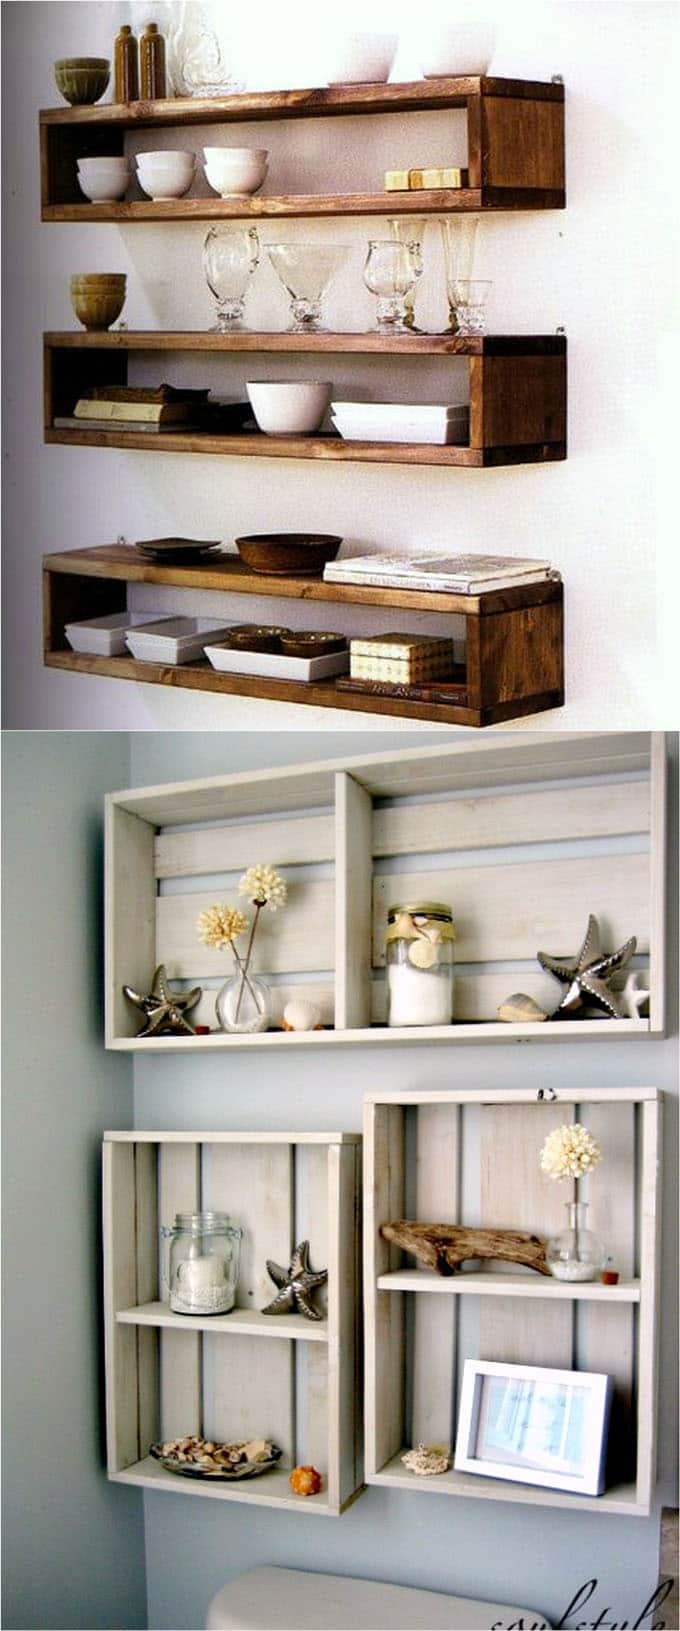 Diy Floating Shelves Wall, How To Mount Floating Wall Shelves